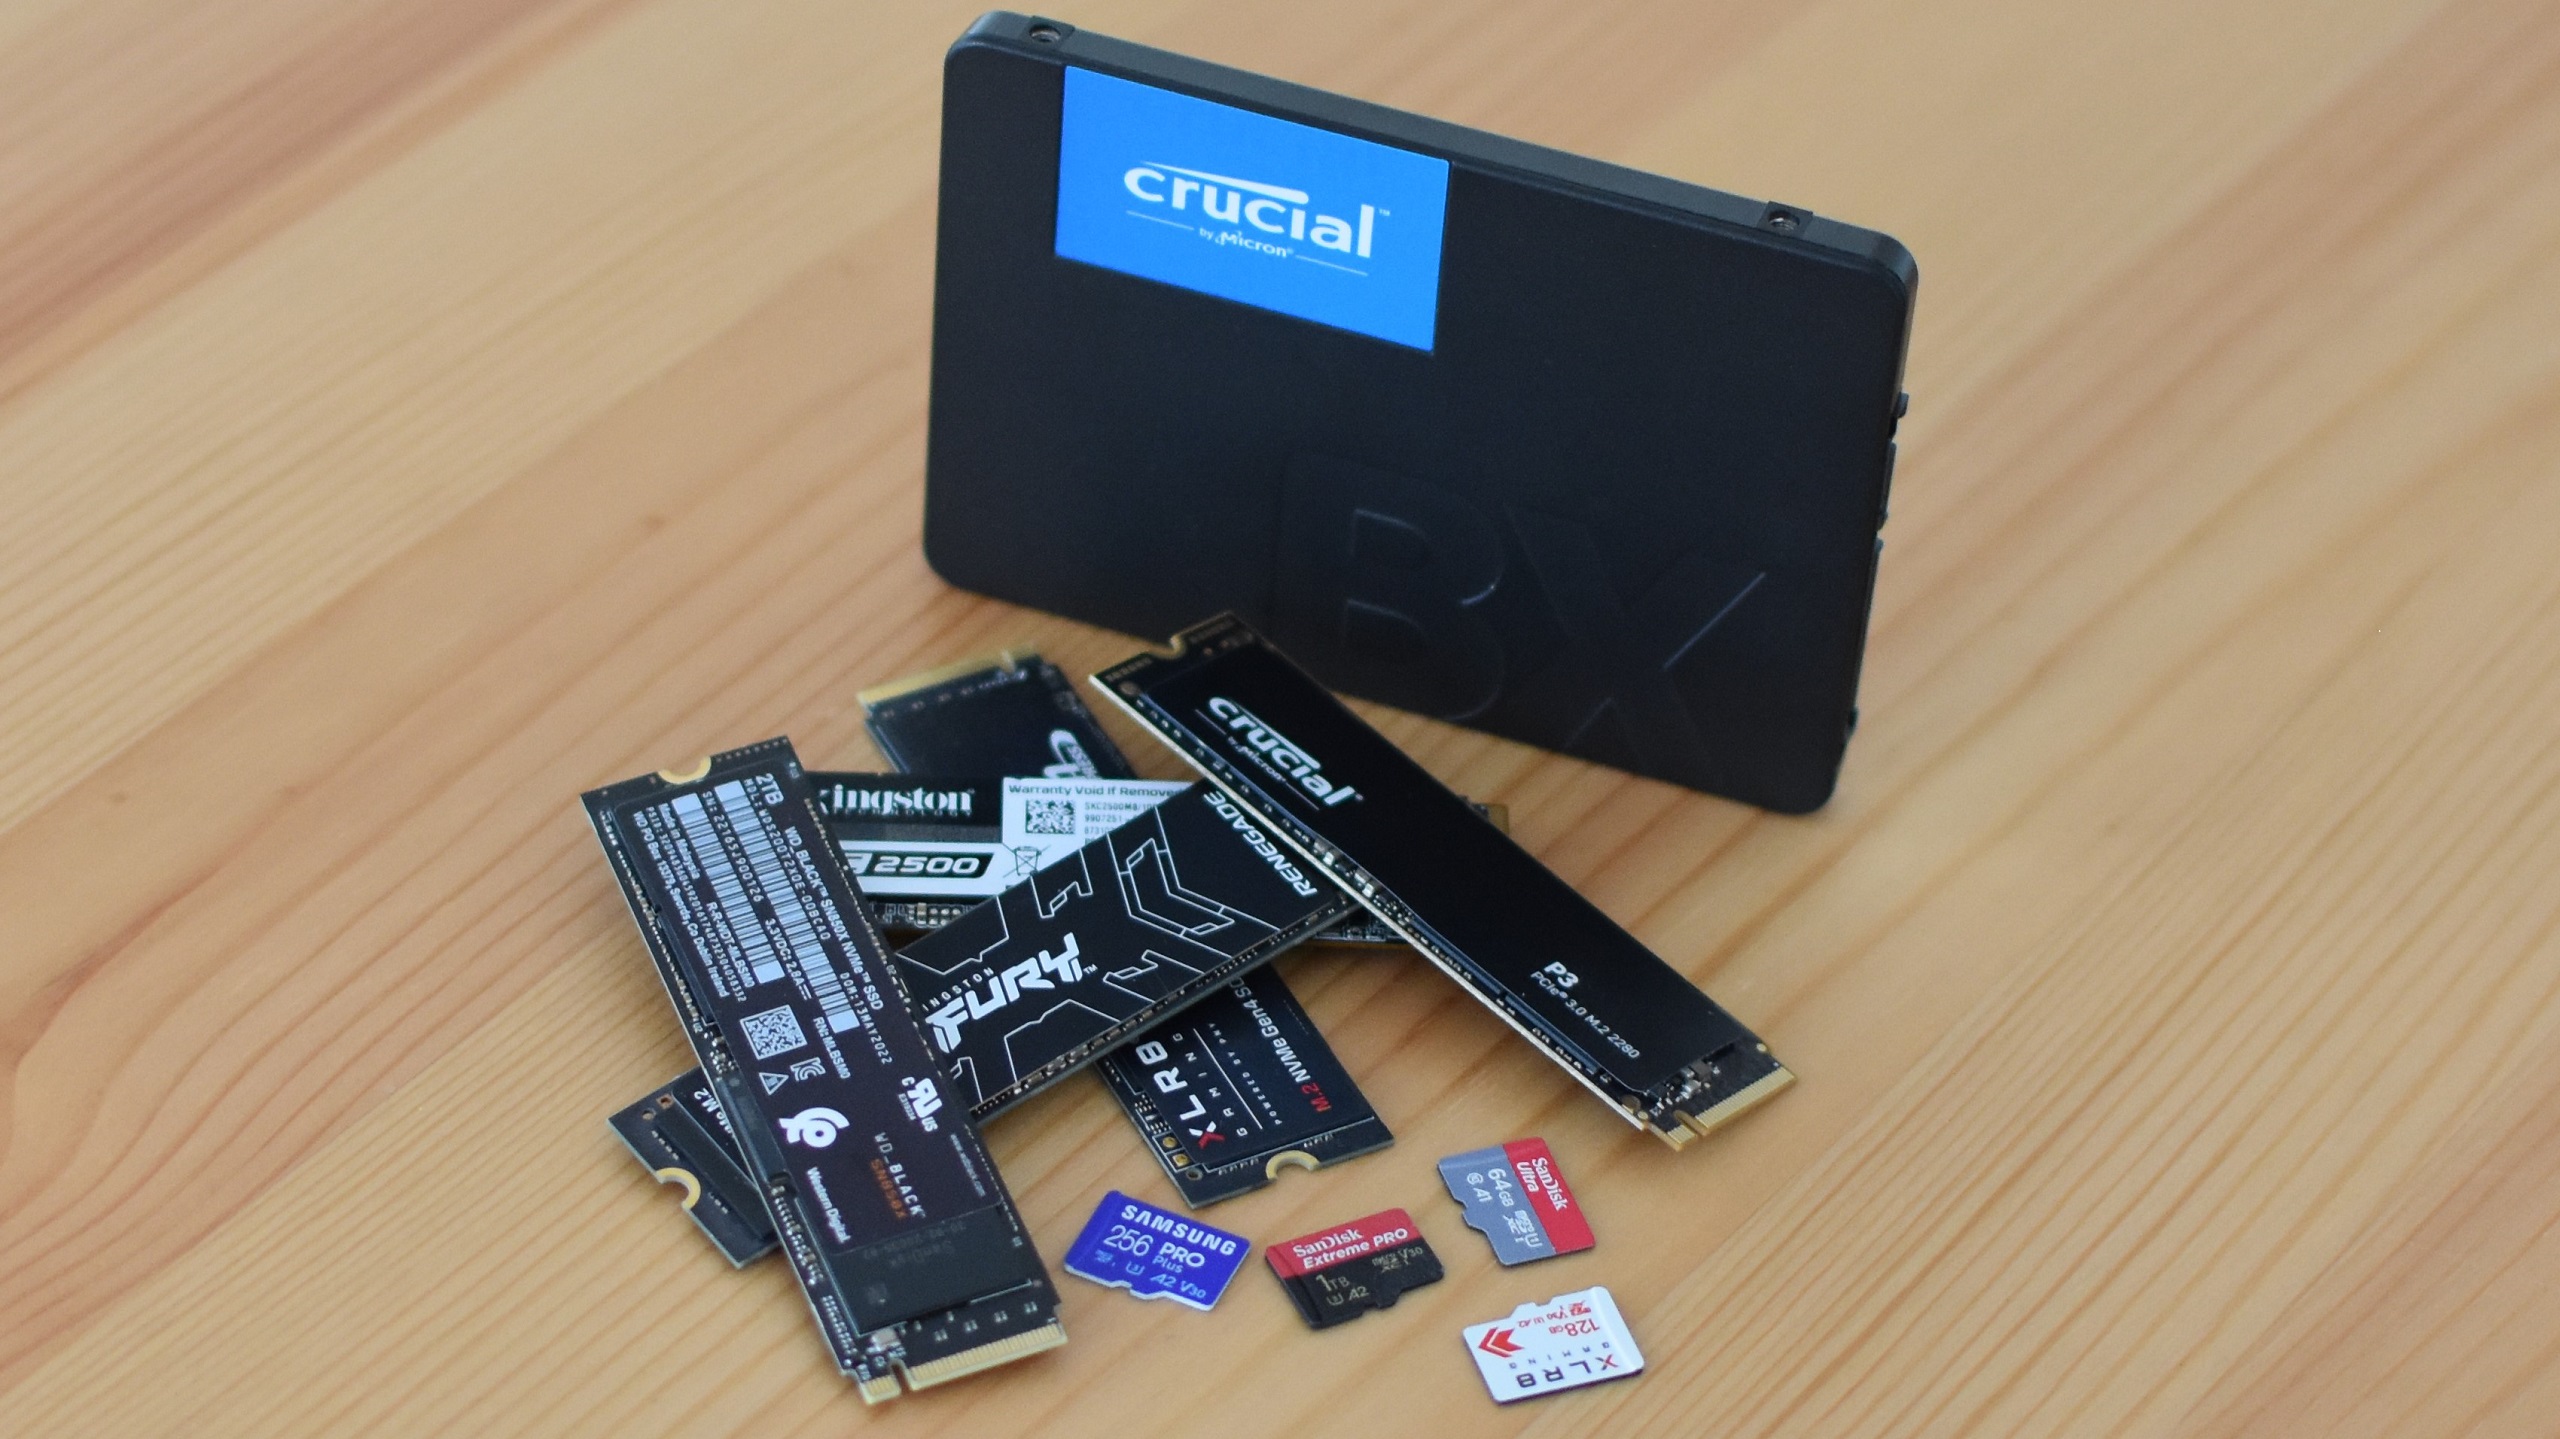 Various SSDs and microSD cards on a table.